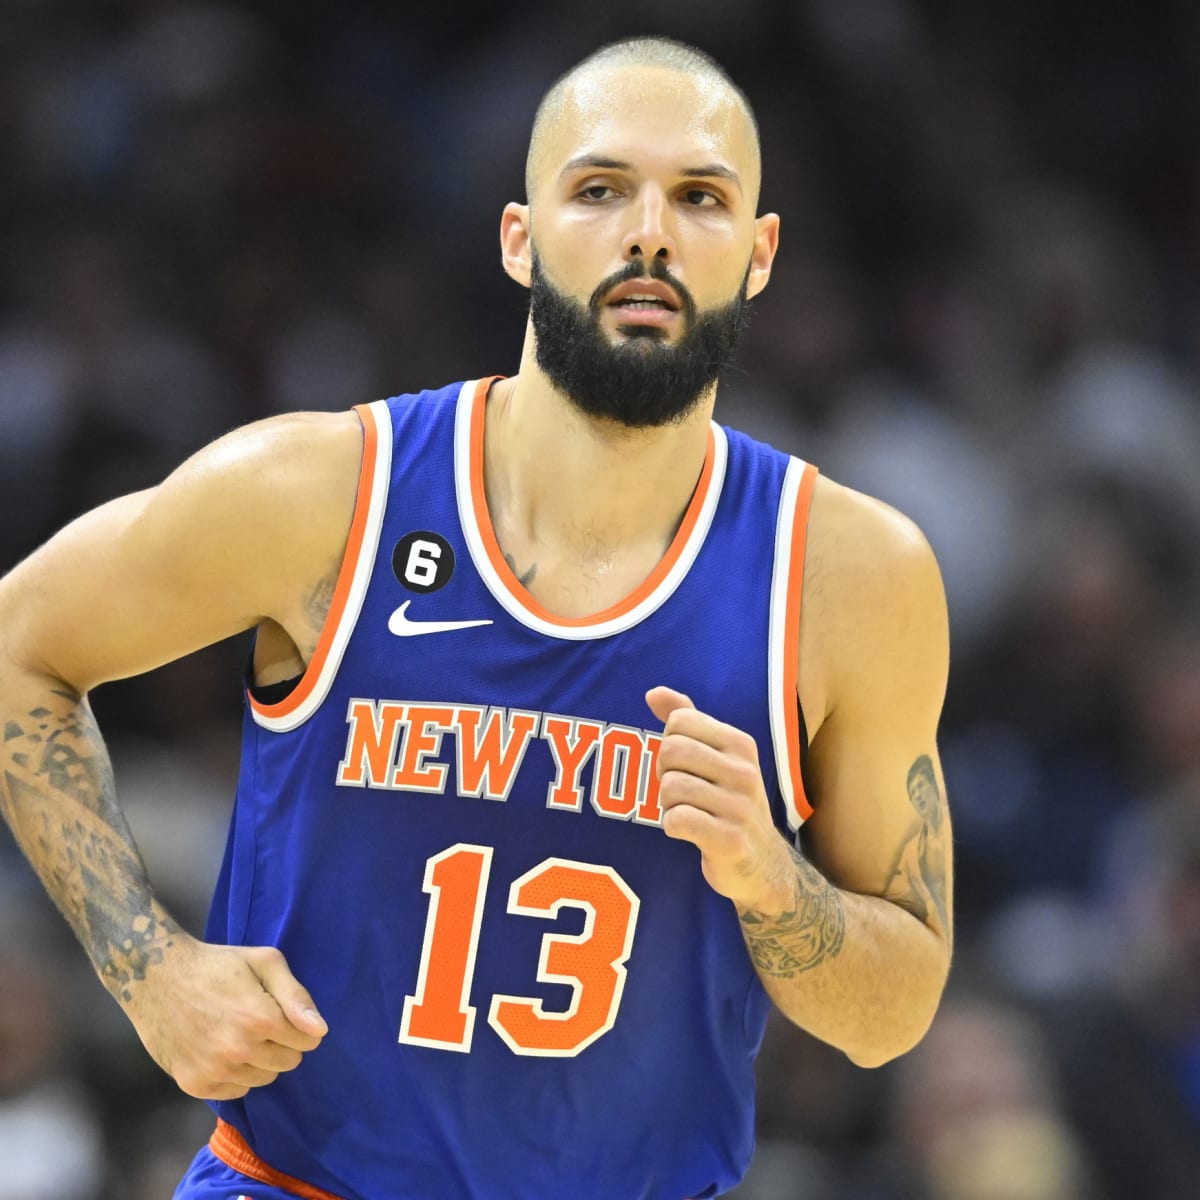 Has Evan Fournier proven he should remain in Knicks rotation?